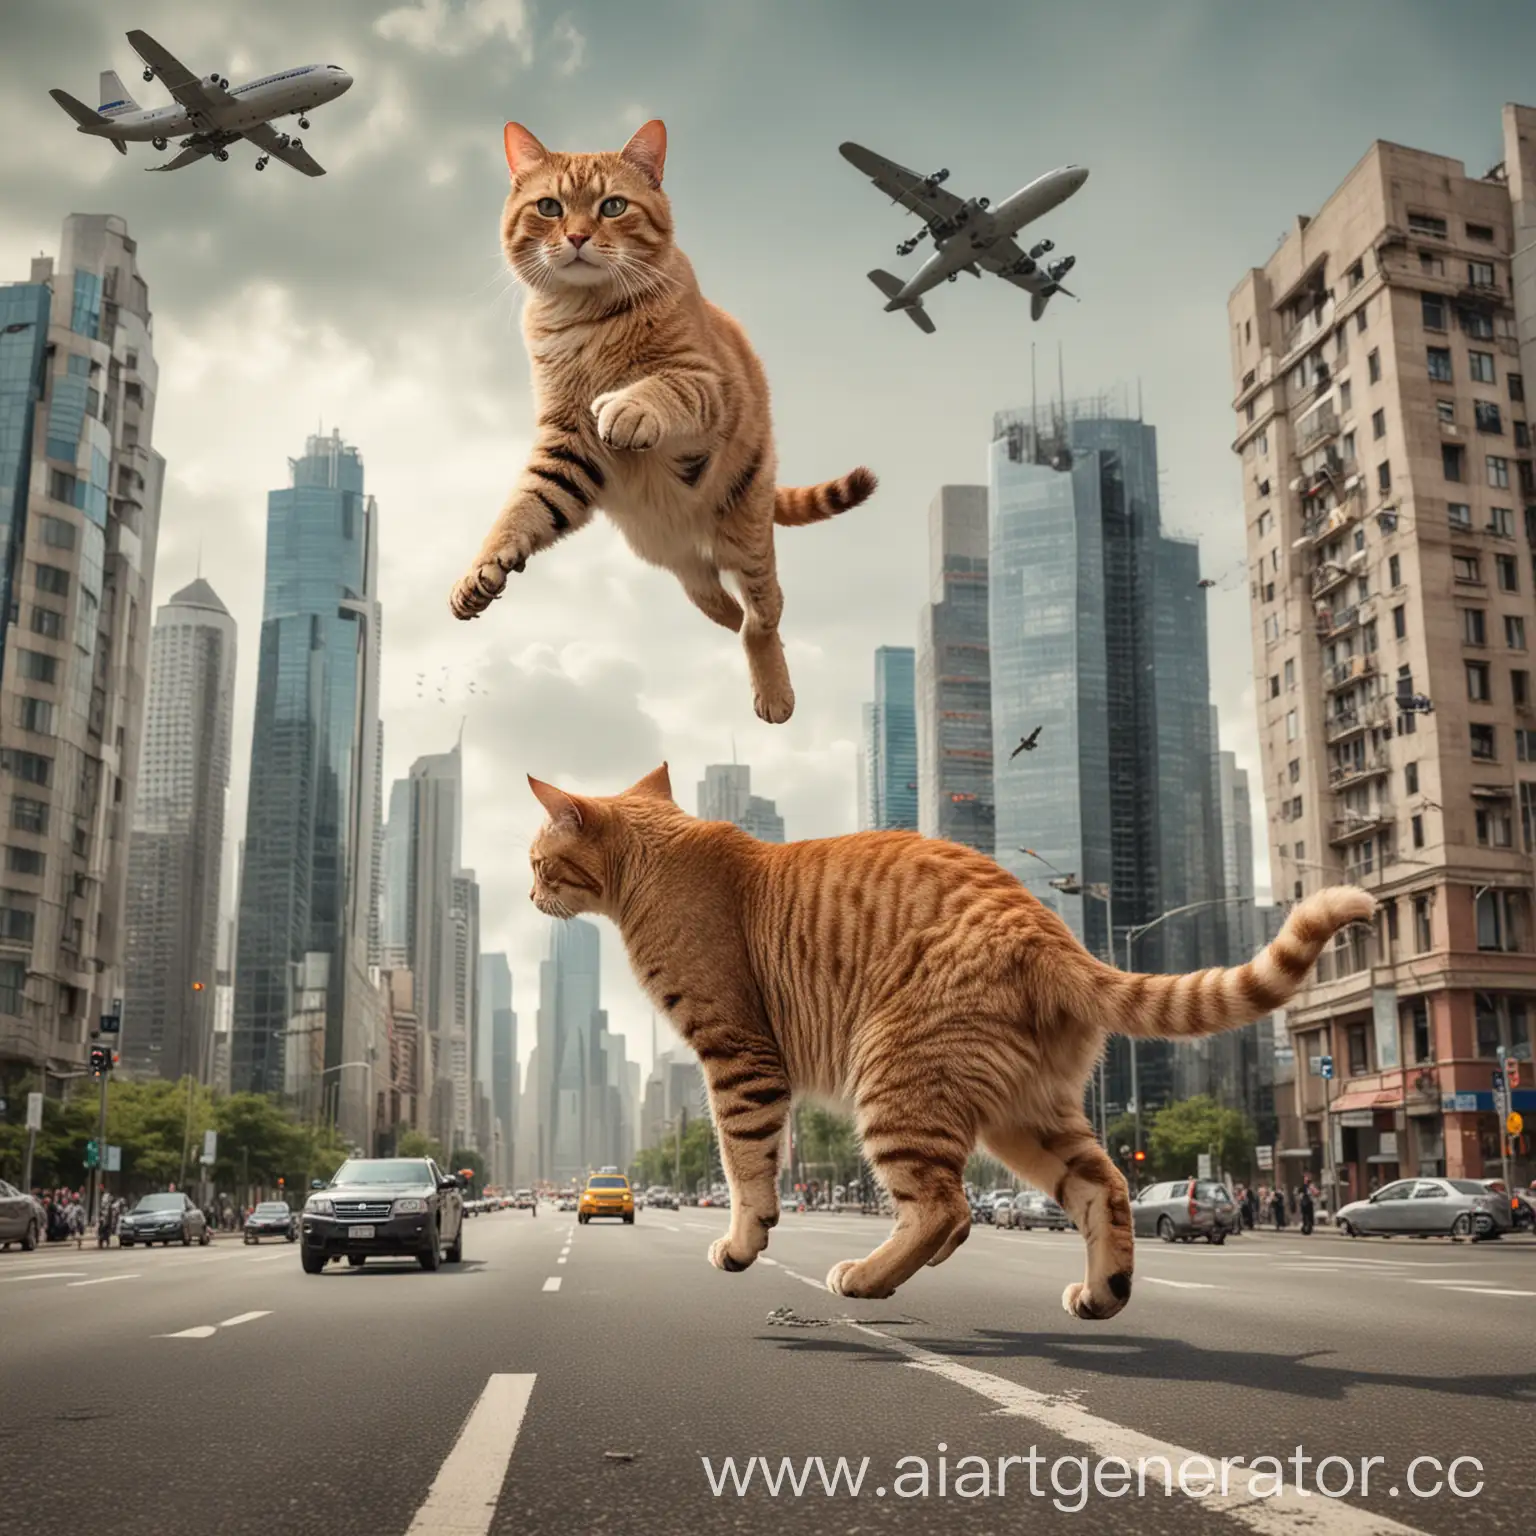 Giant-Cats-Tower-Over-Cityscape-Cat-Observing-Cyclist-Another-Playfully-Swiping-at-Airplane